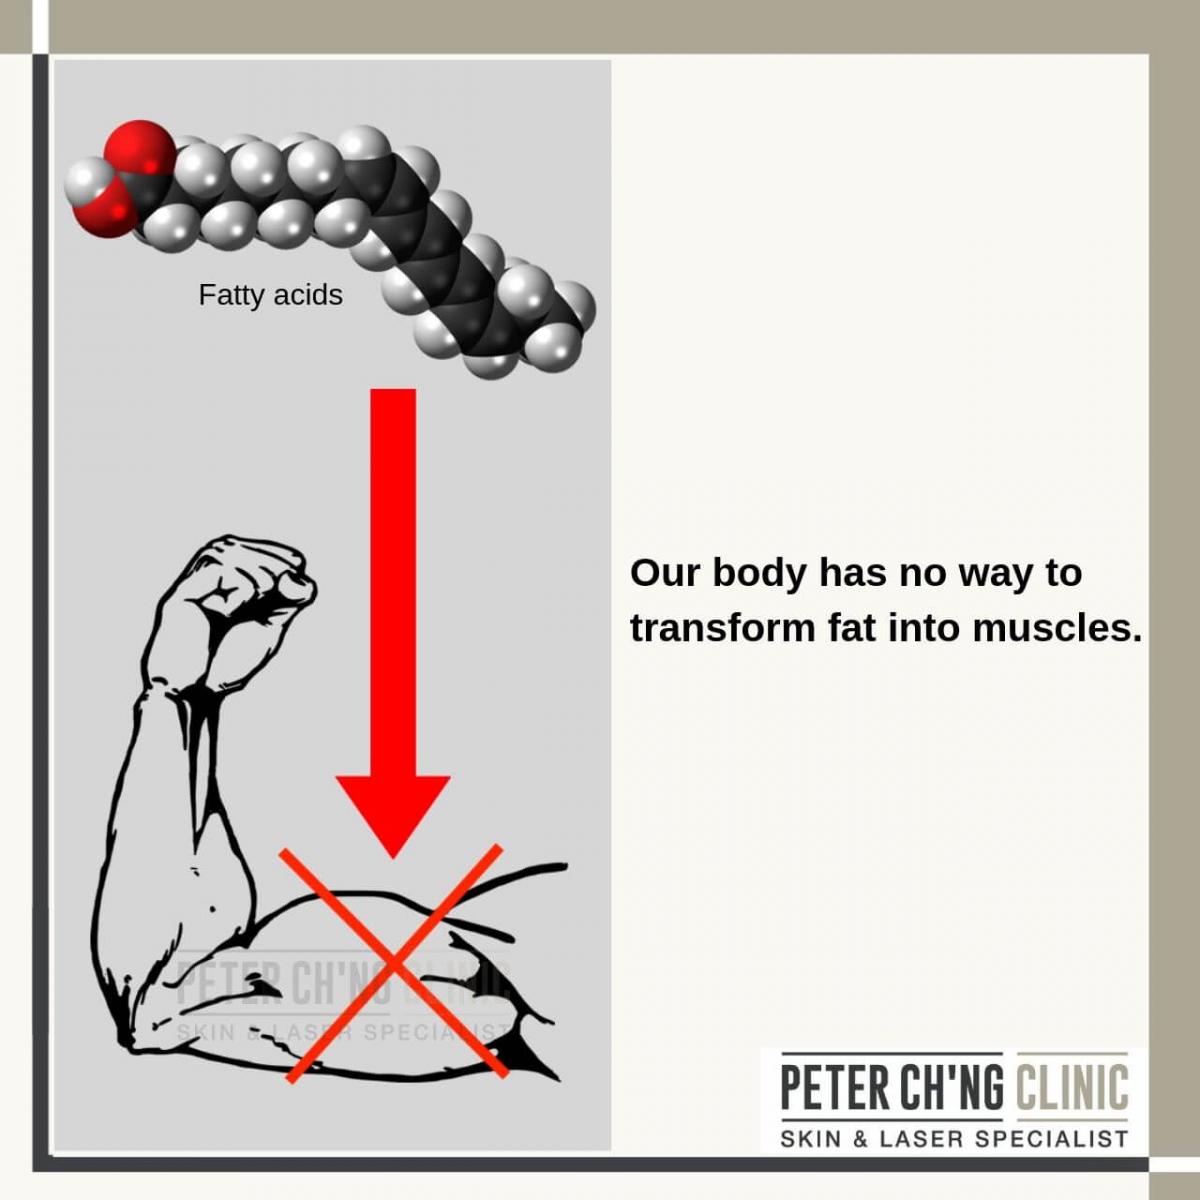 Our body has no way to transform fat into muscles